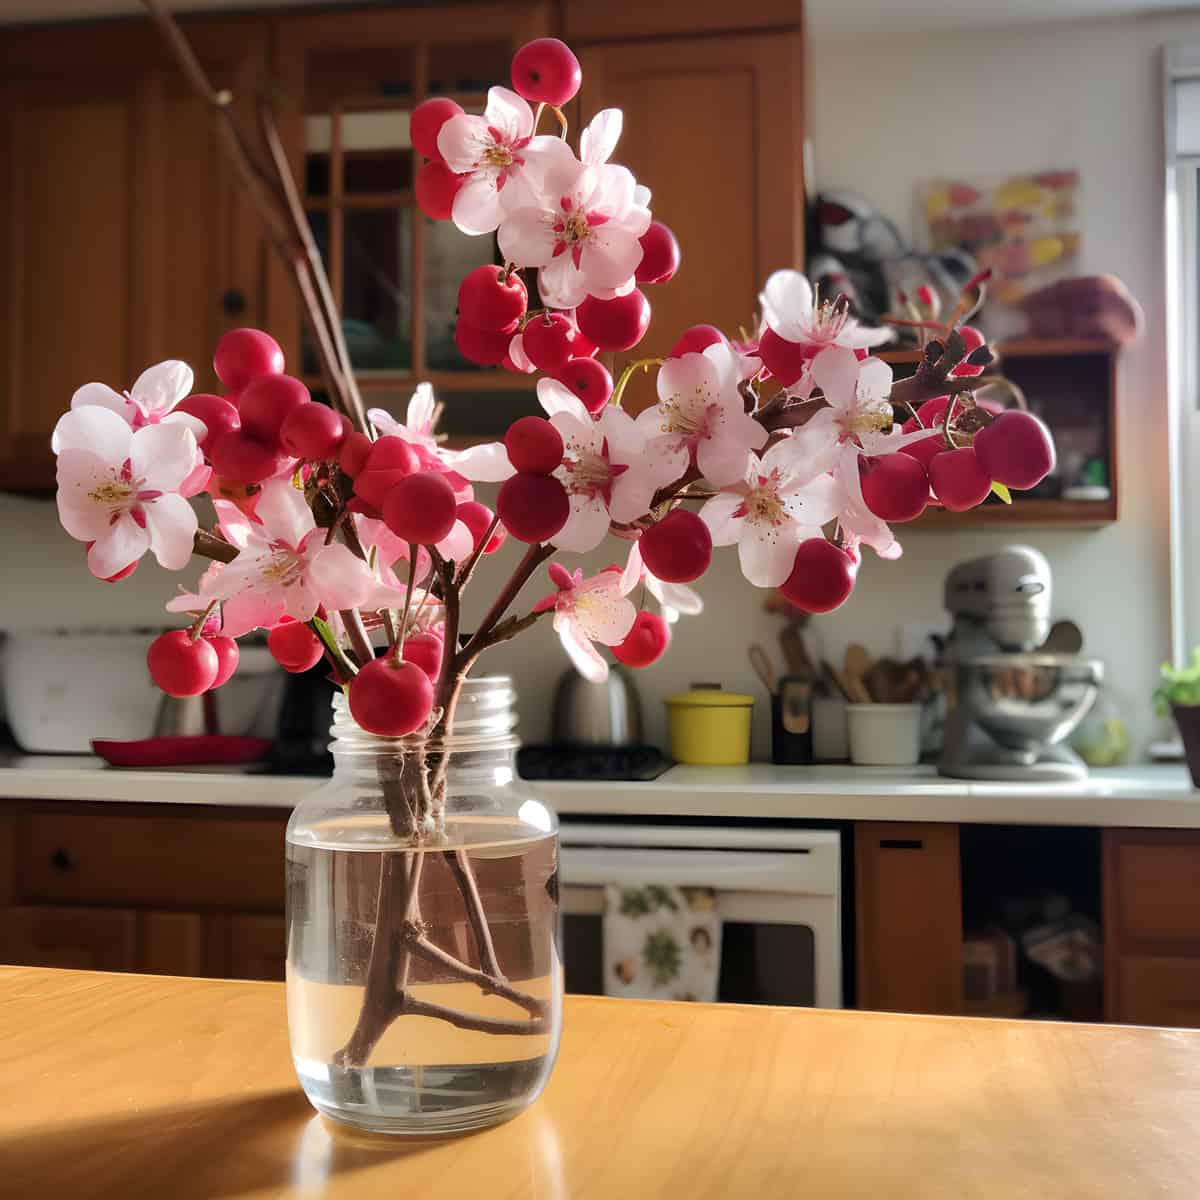 Hall Crabapple on a kitchen counter